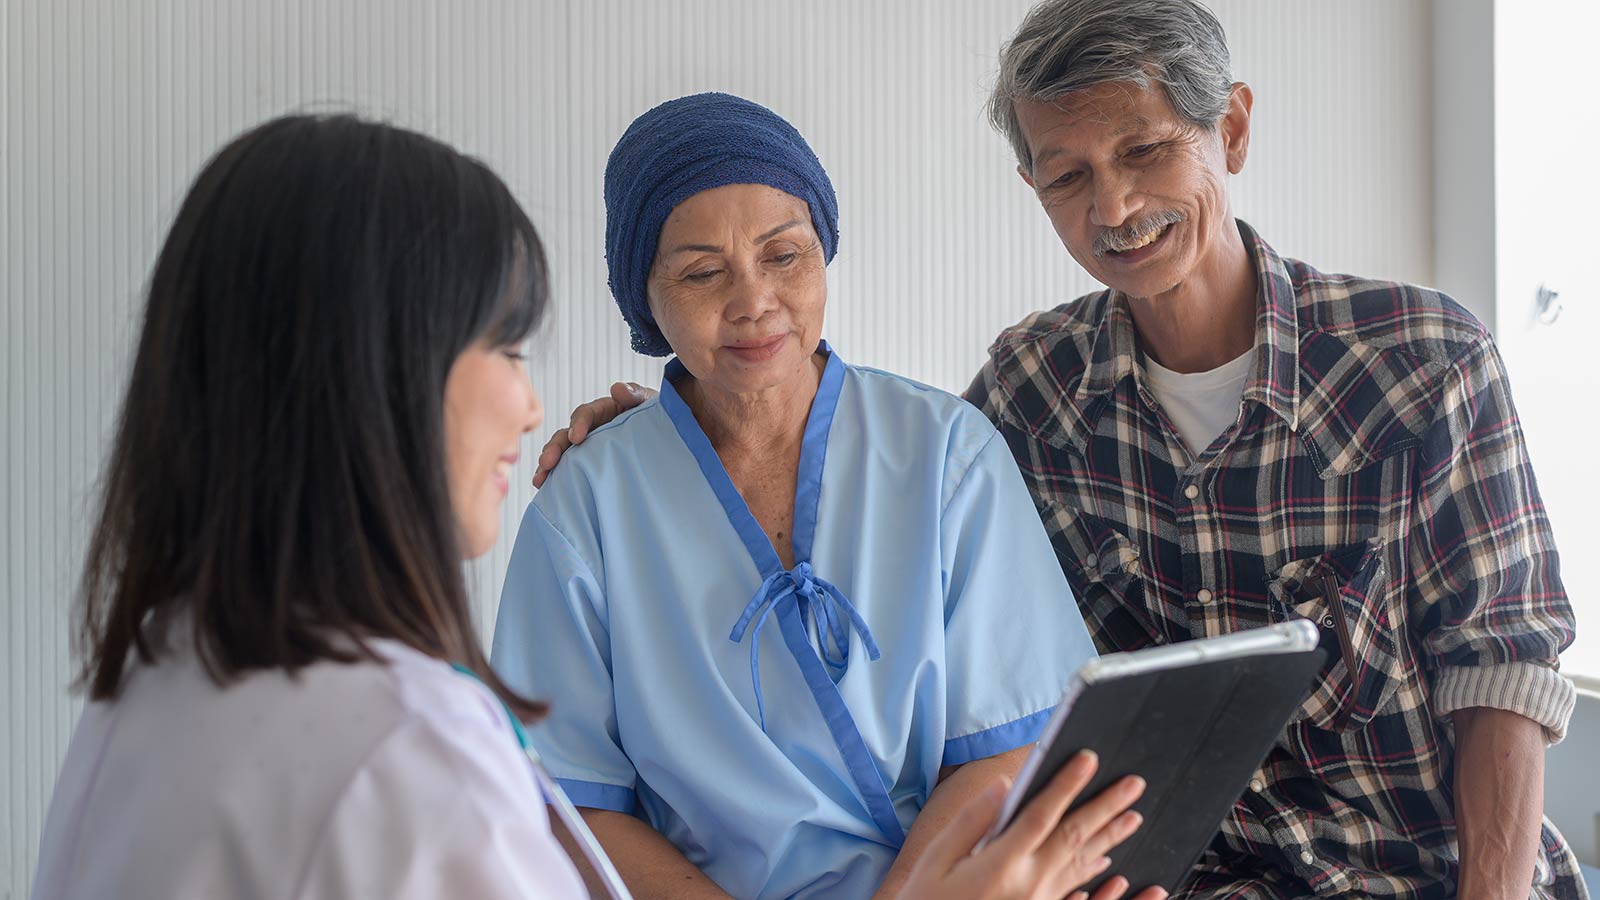 Photo of a female nurse talking to a Muslim female patient and elderly man in a shirt.